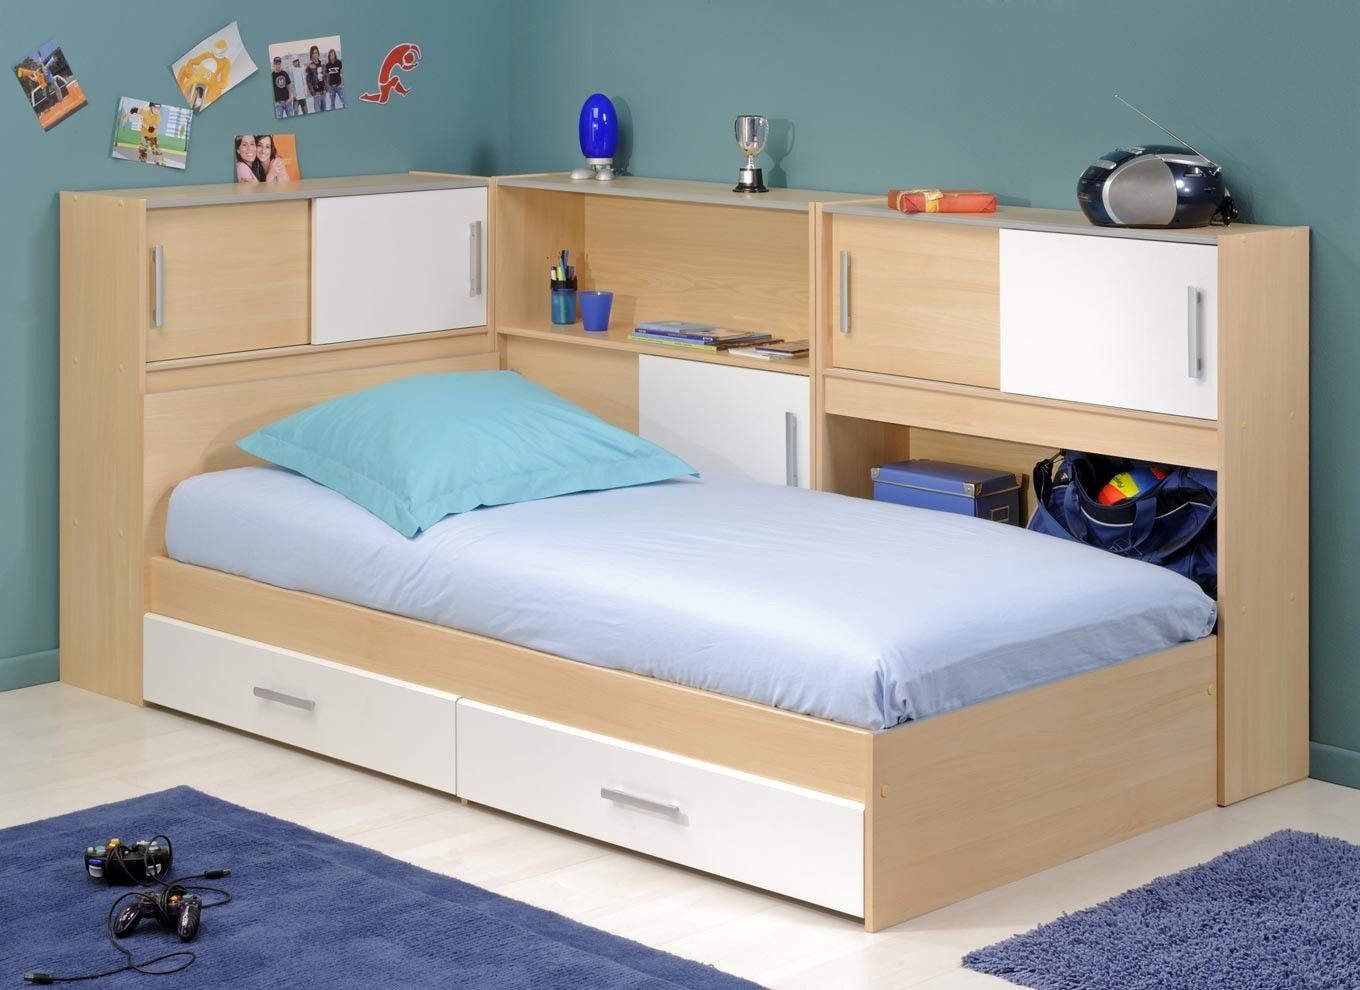 Childrens Beds With Underbed Storage
 Snoop Single Bedstead With Side Storage